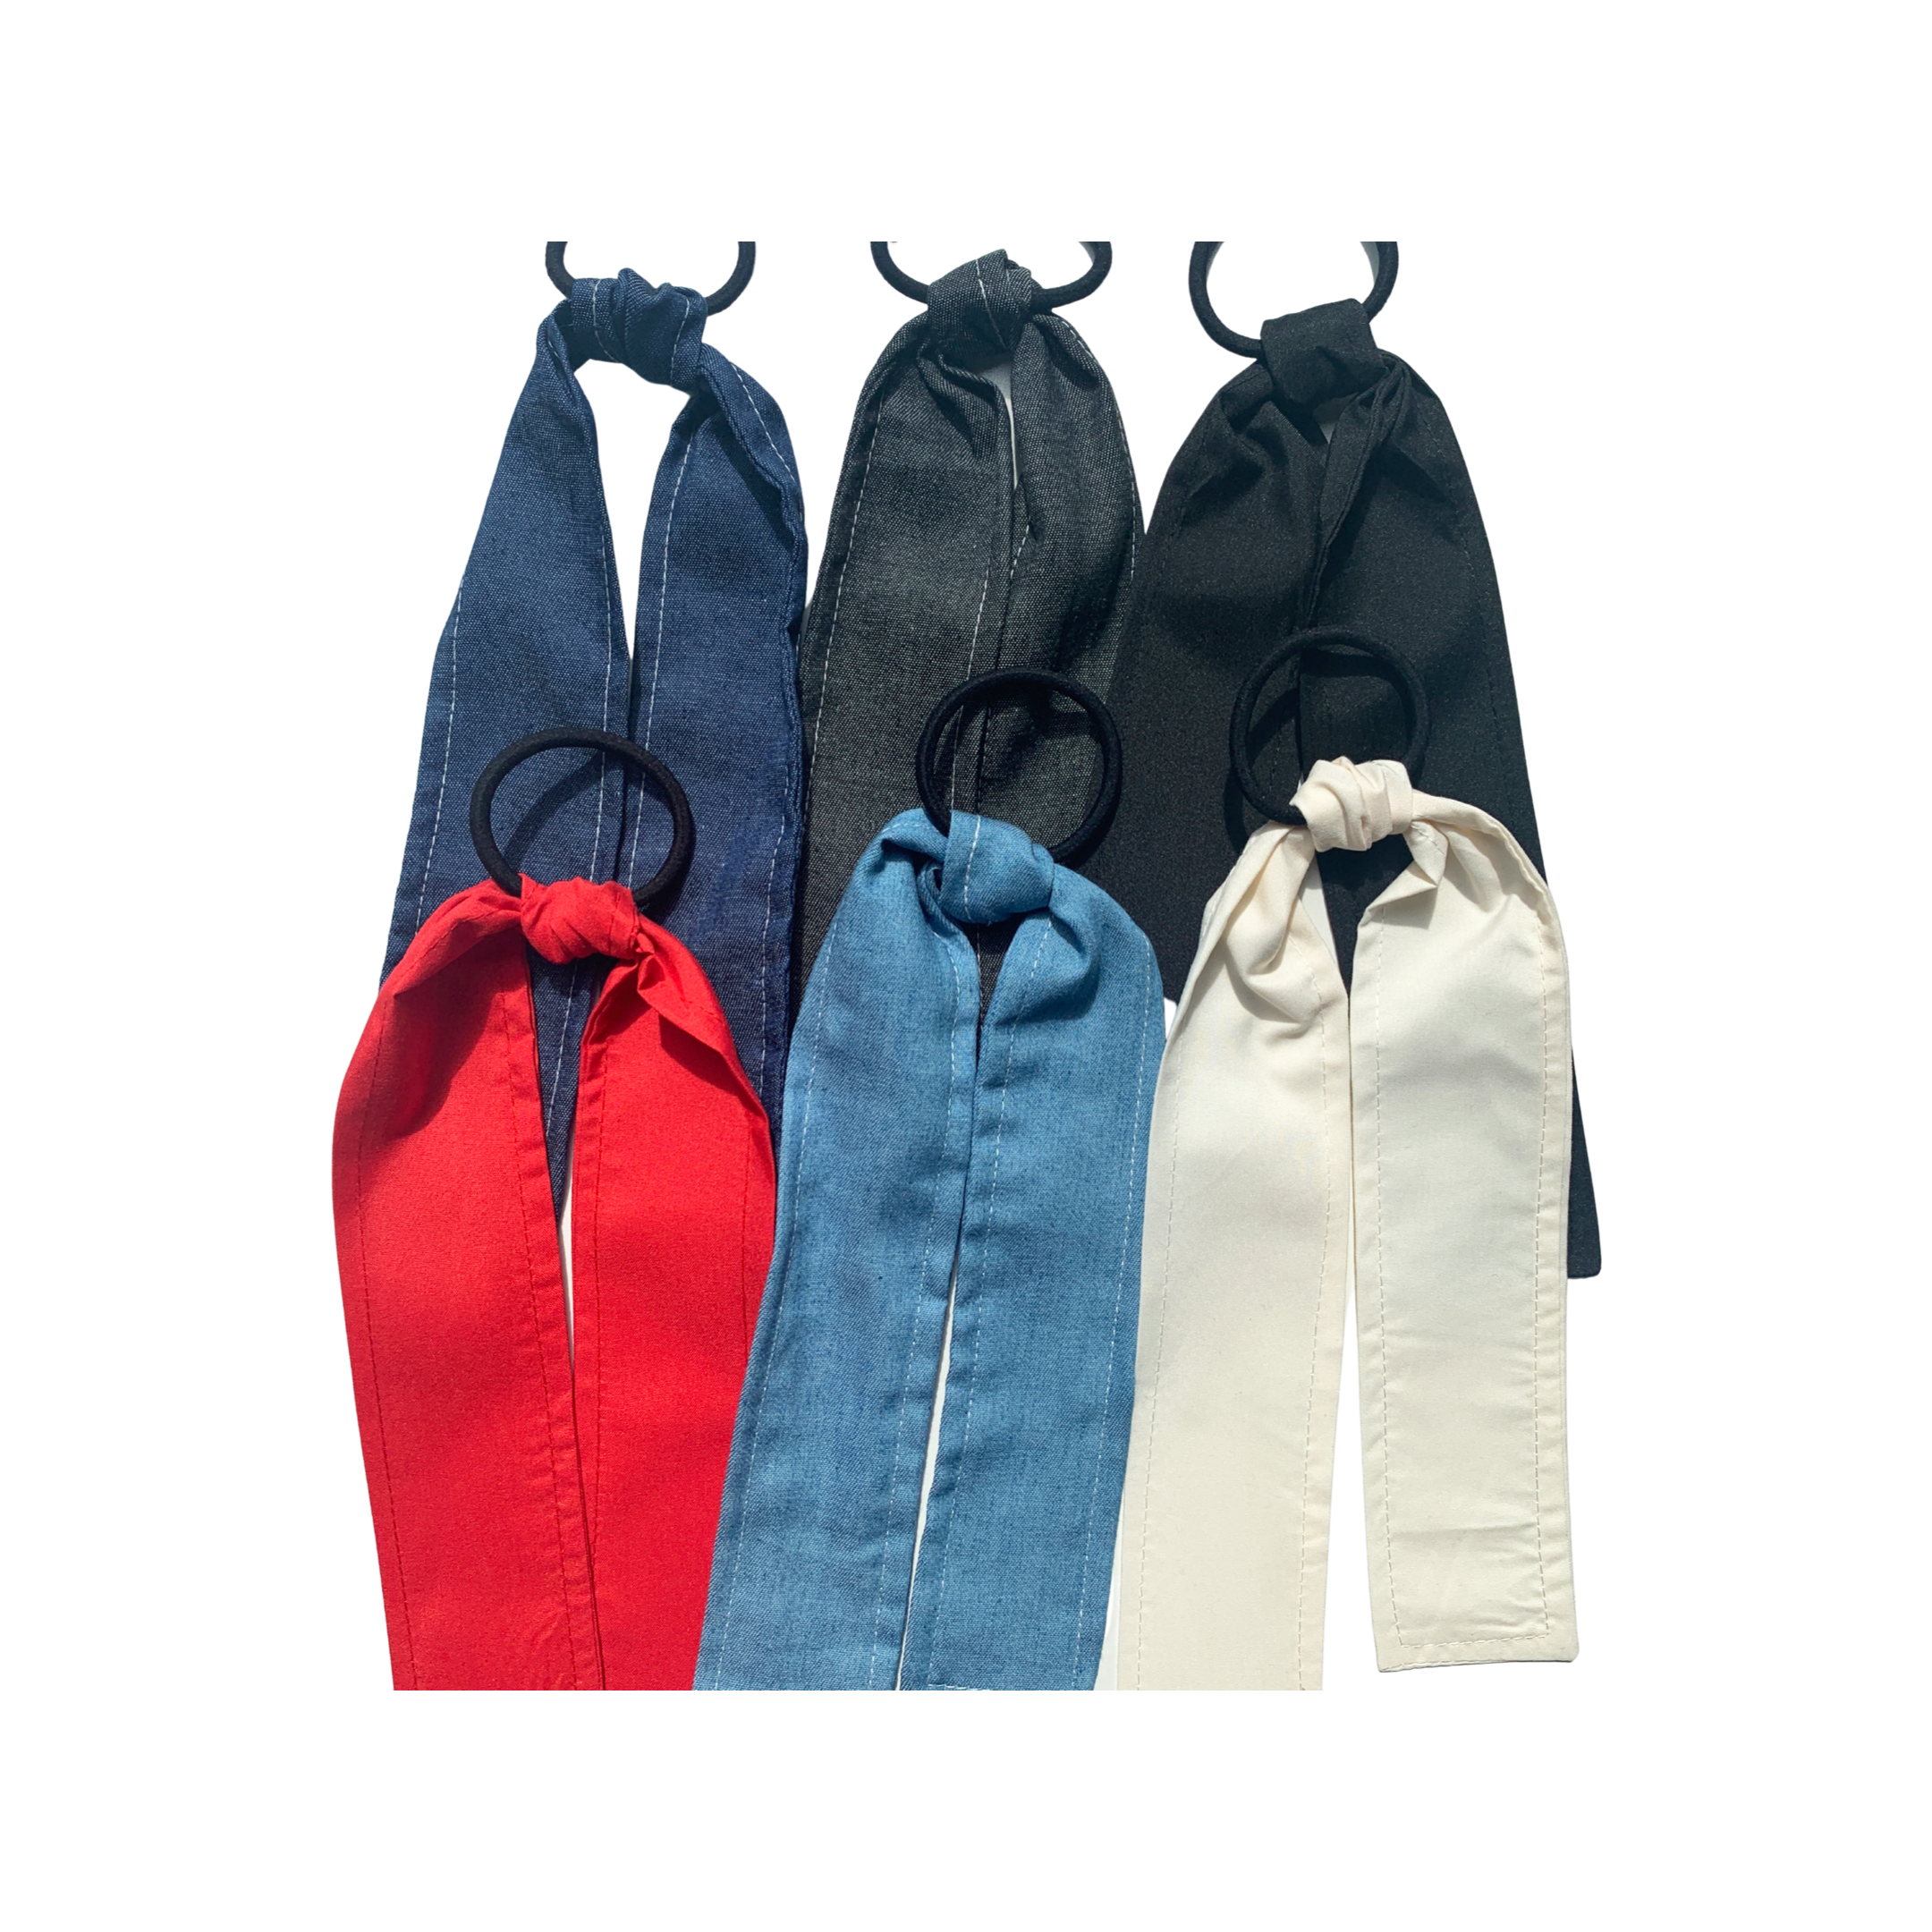 Solid Color Denim, black, red, chambray, burgundy, white, navy, tan, Hair Ties, school, camp